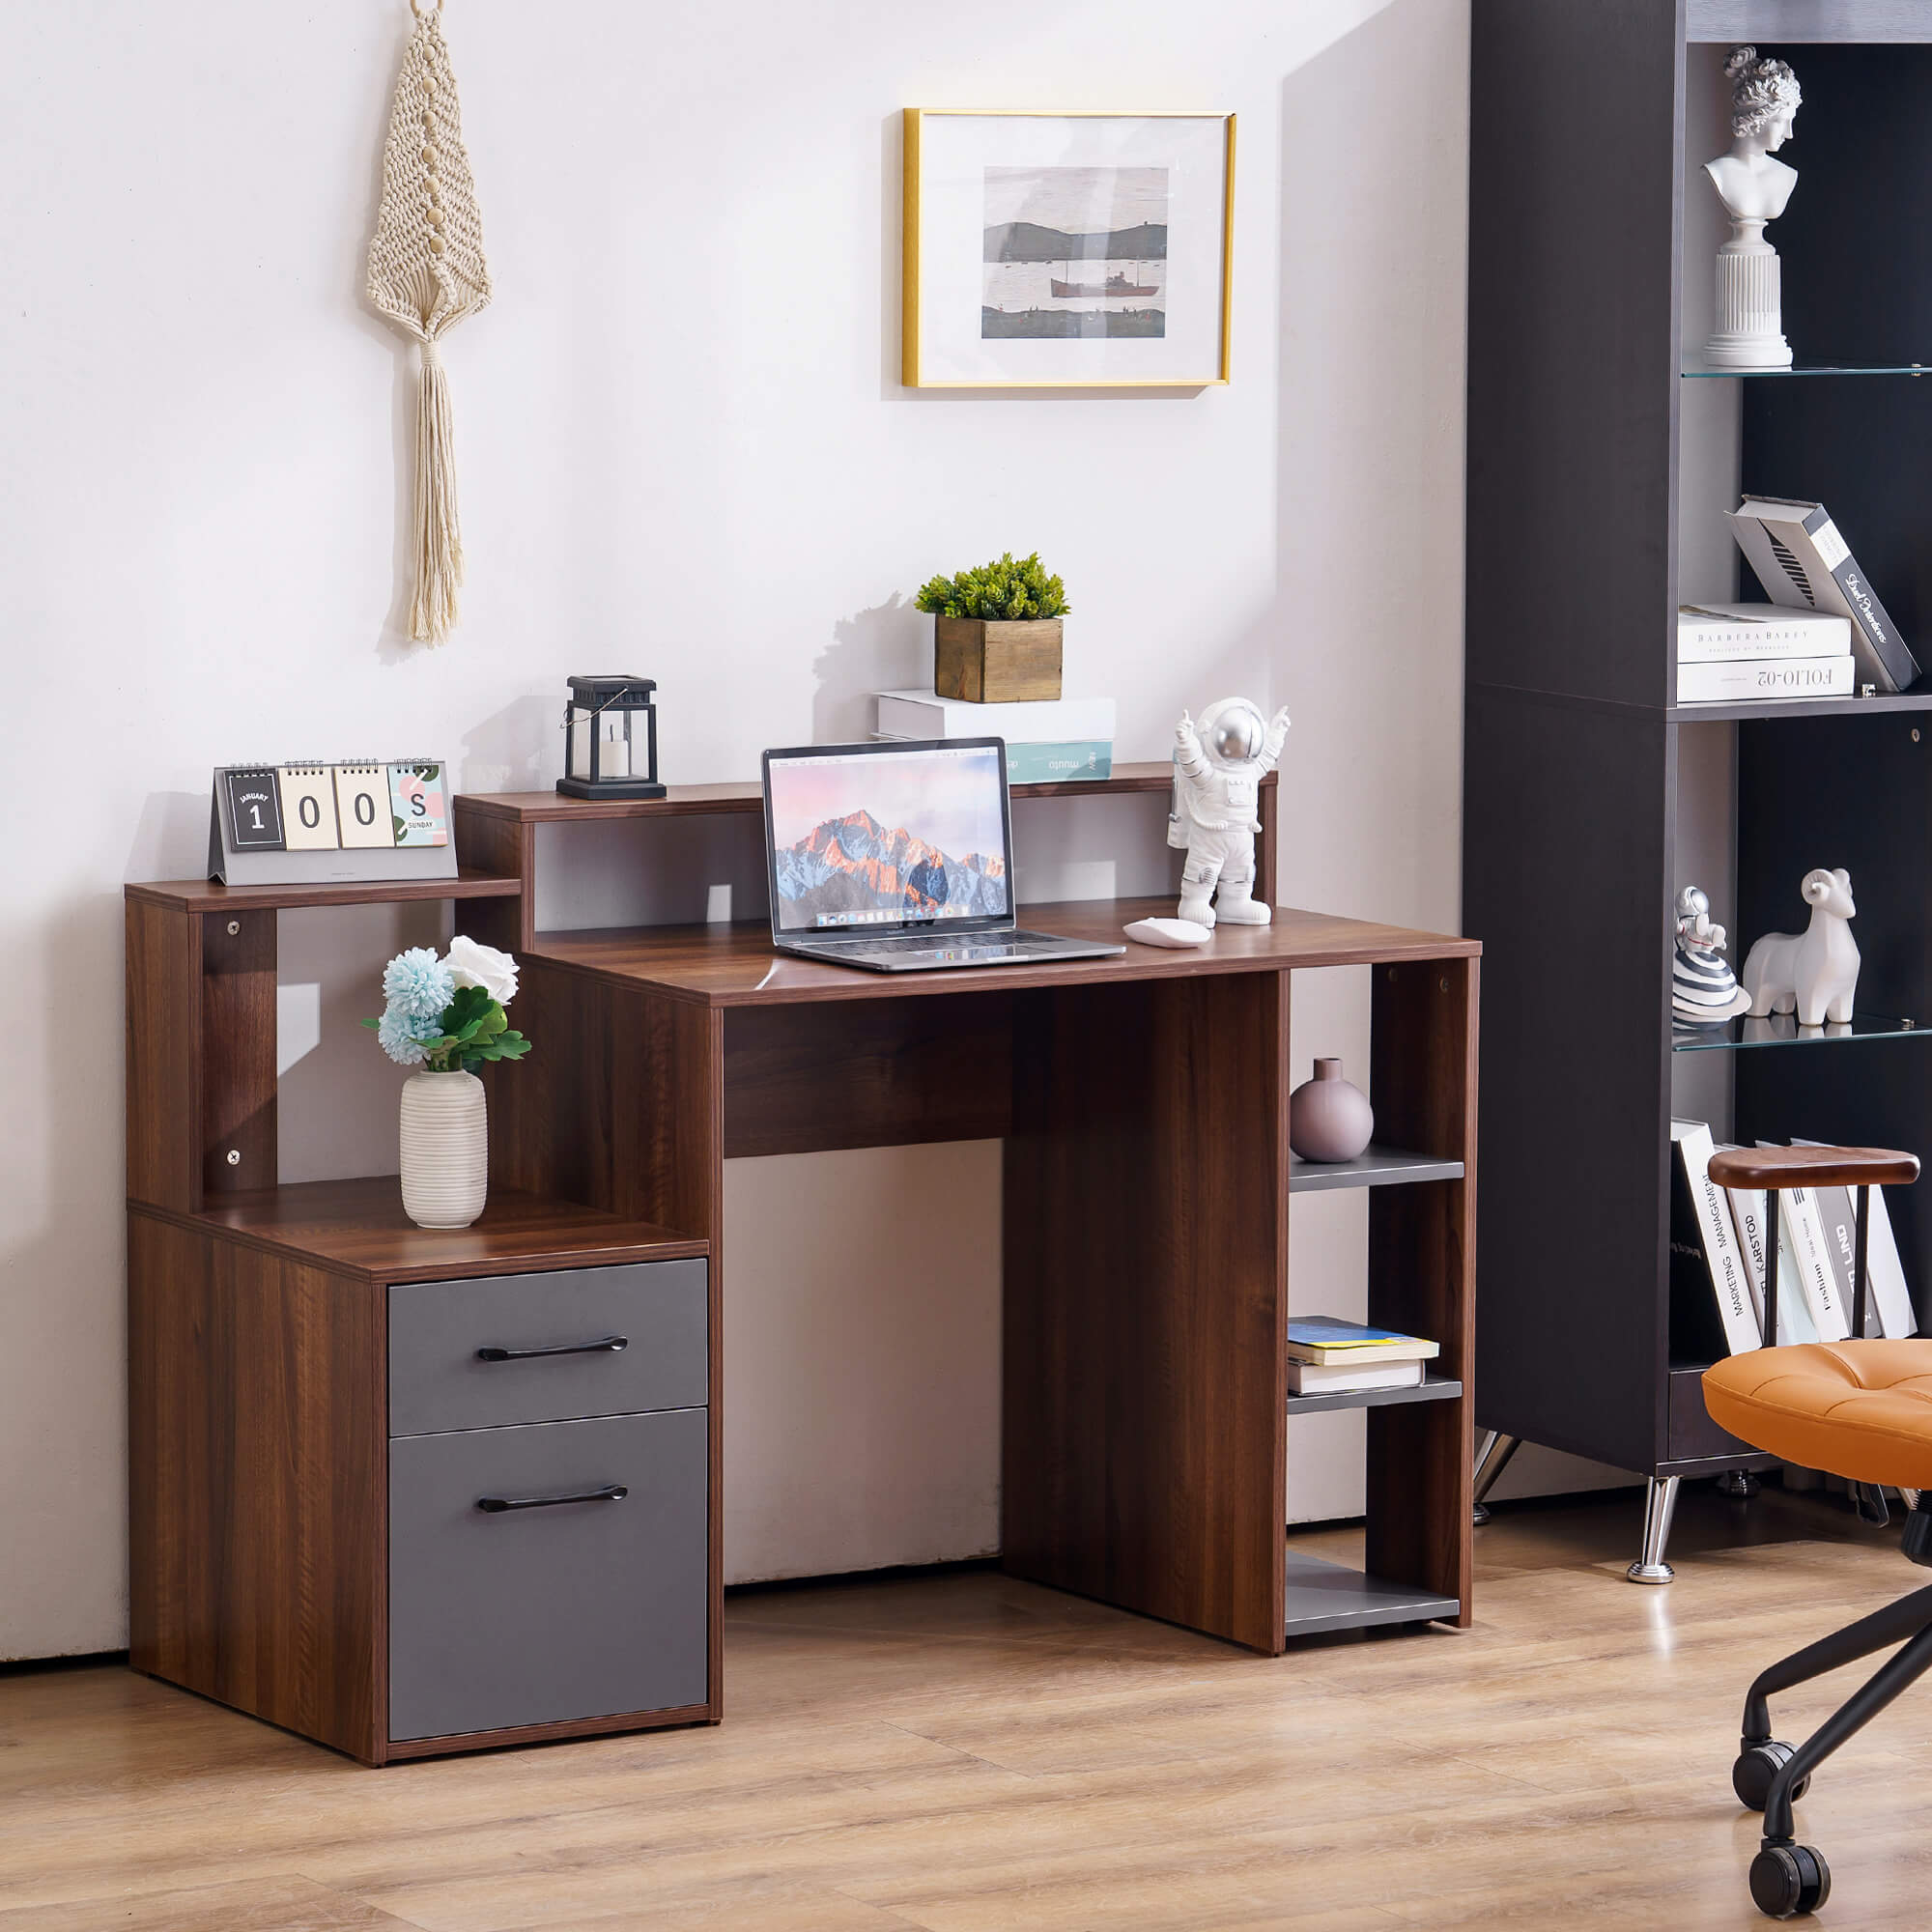 Ivinta Computer Desk with Drawers and Hutch, Modern Office Desk with File Cabinet, Small Desk for Bedroom